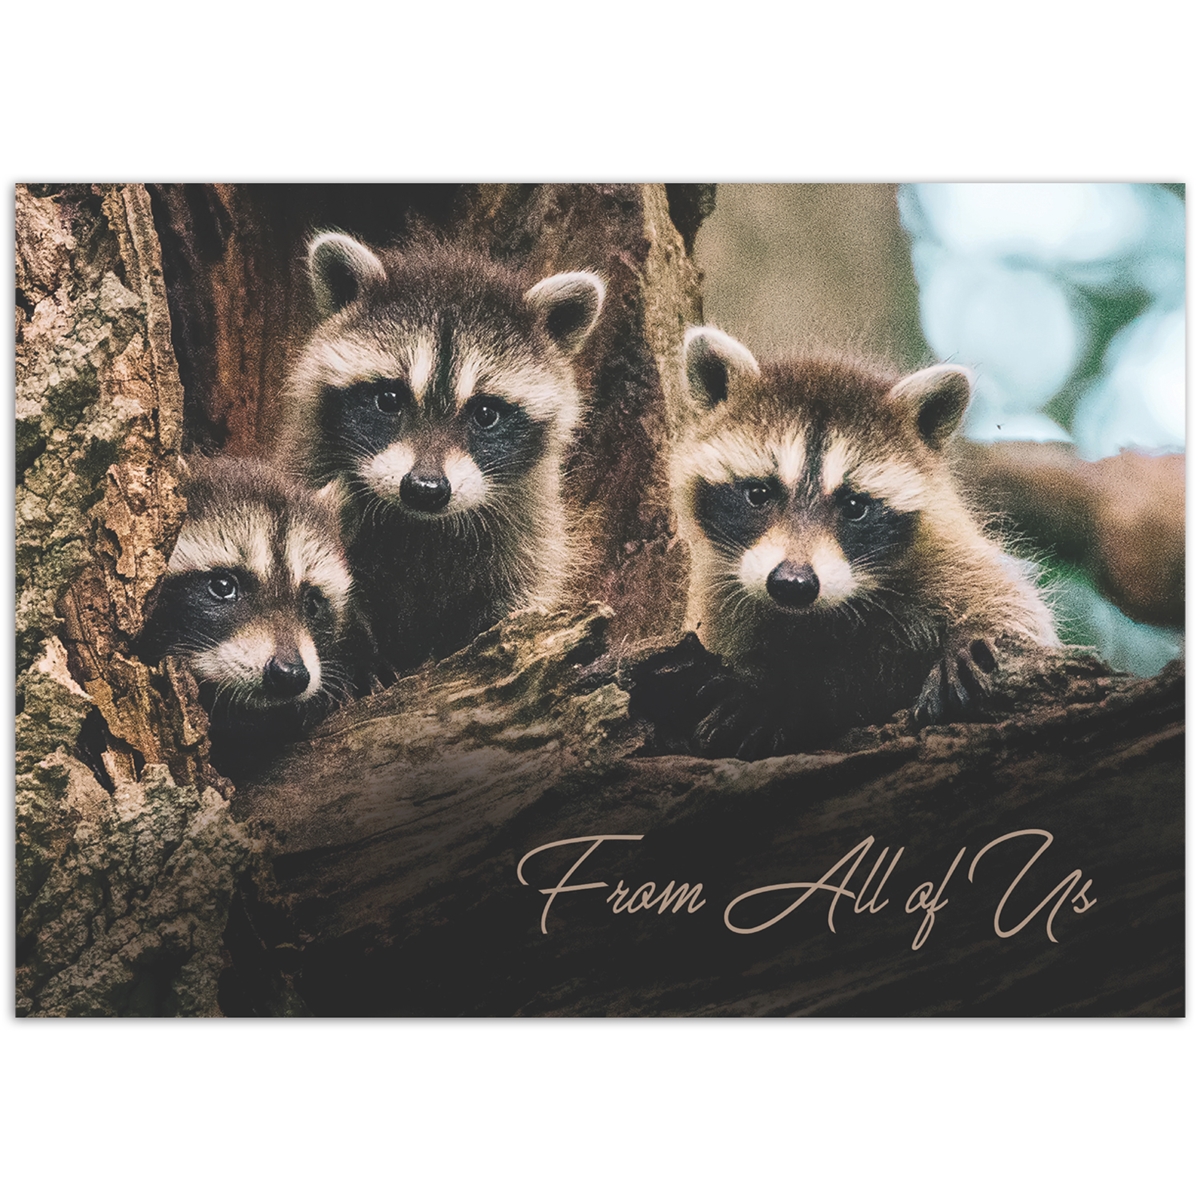 From All of Us Raccoons Holiday Cards